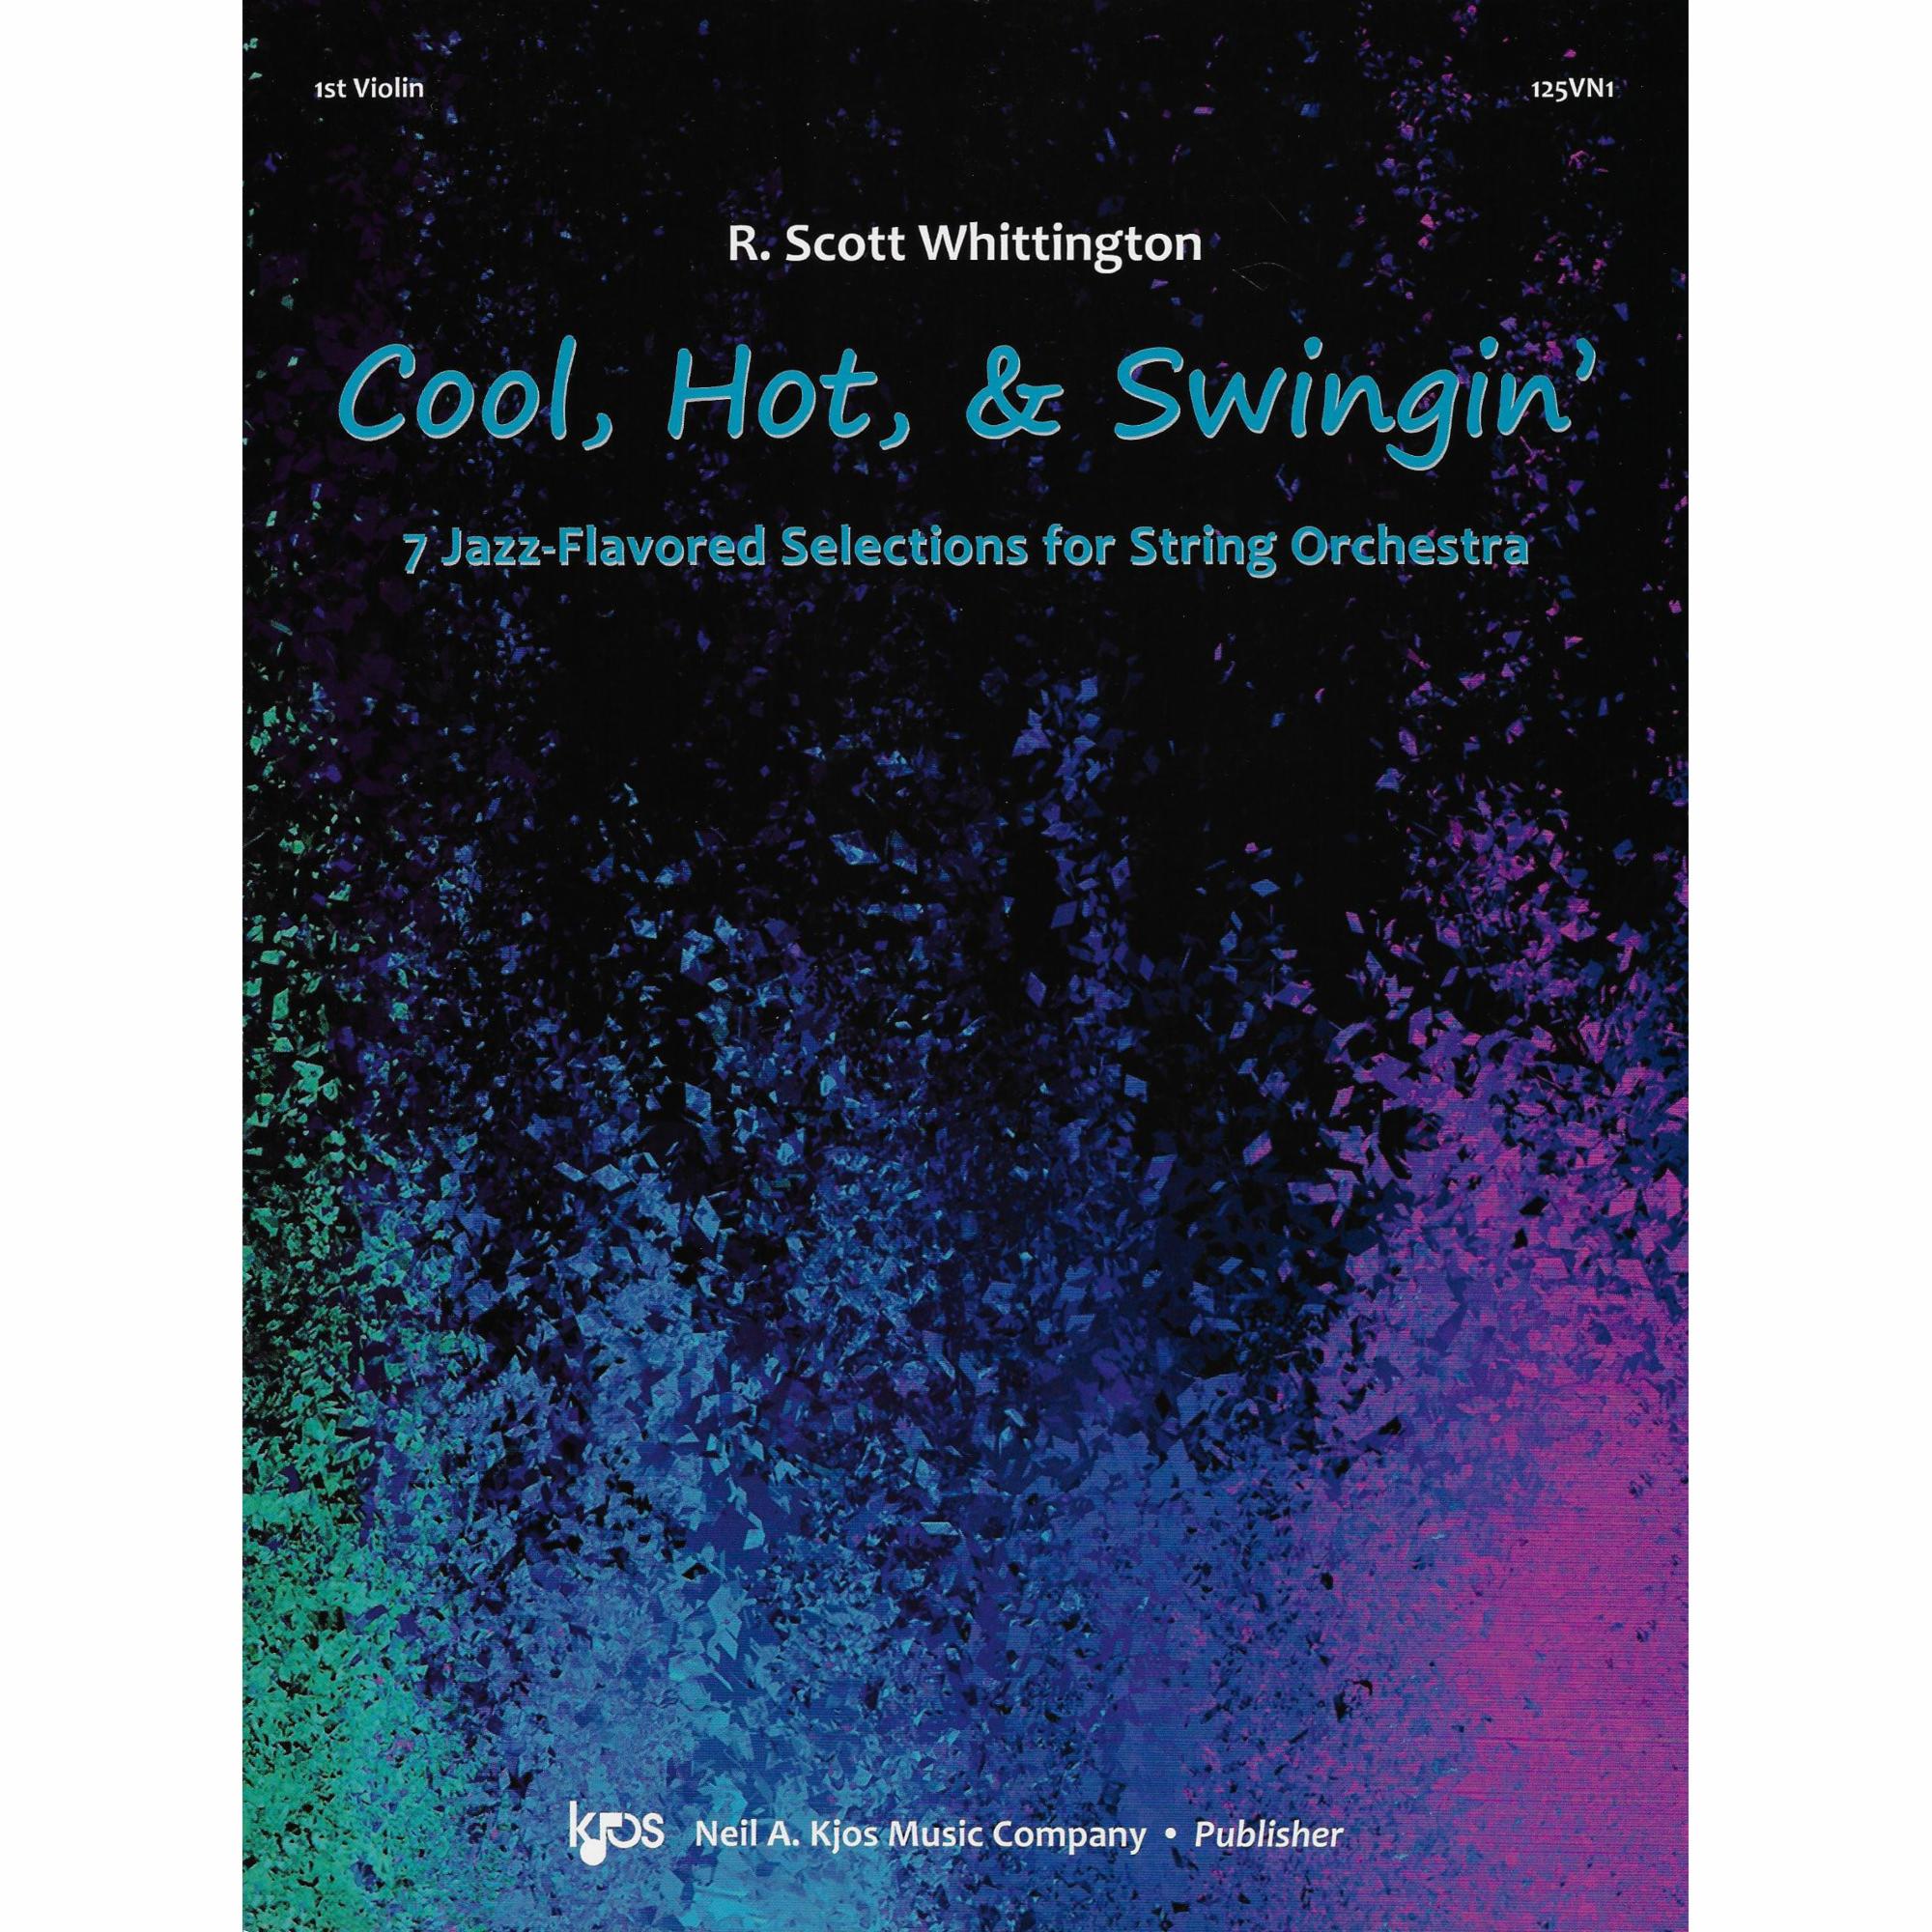 Cool, Hot, & Swingin' for String Orchestra